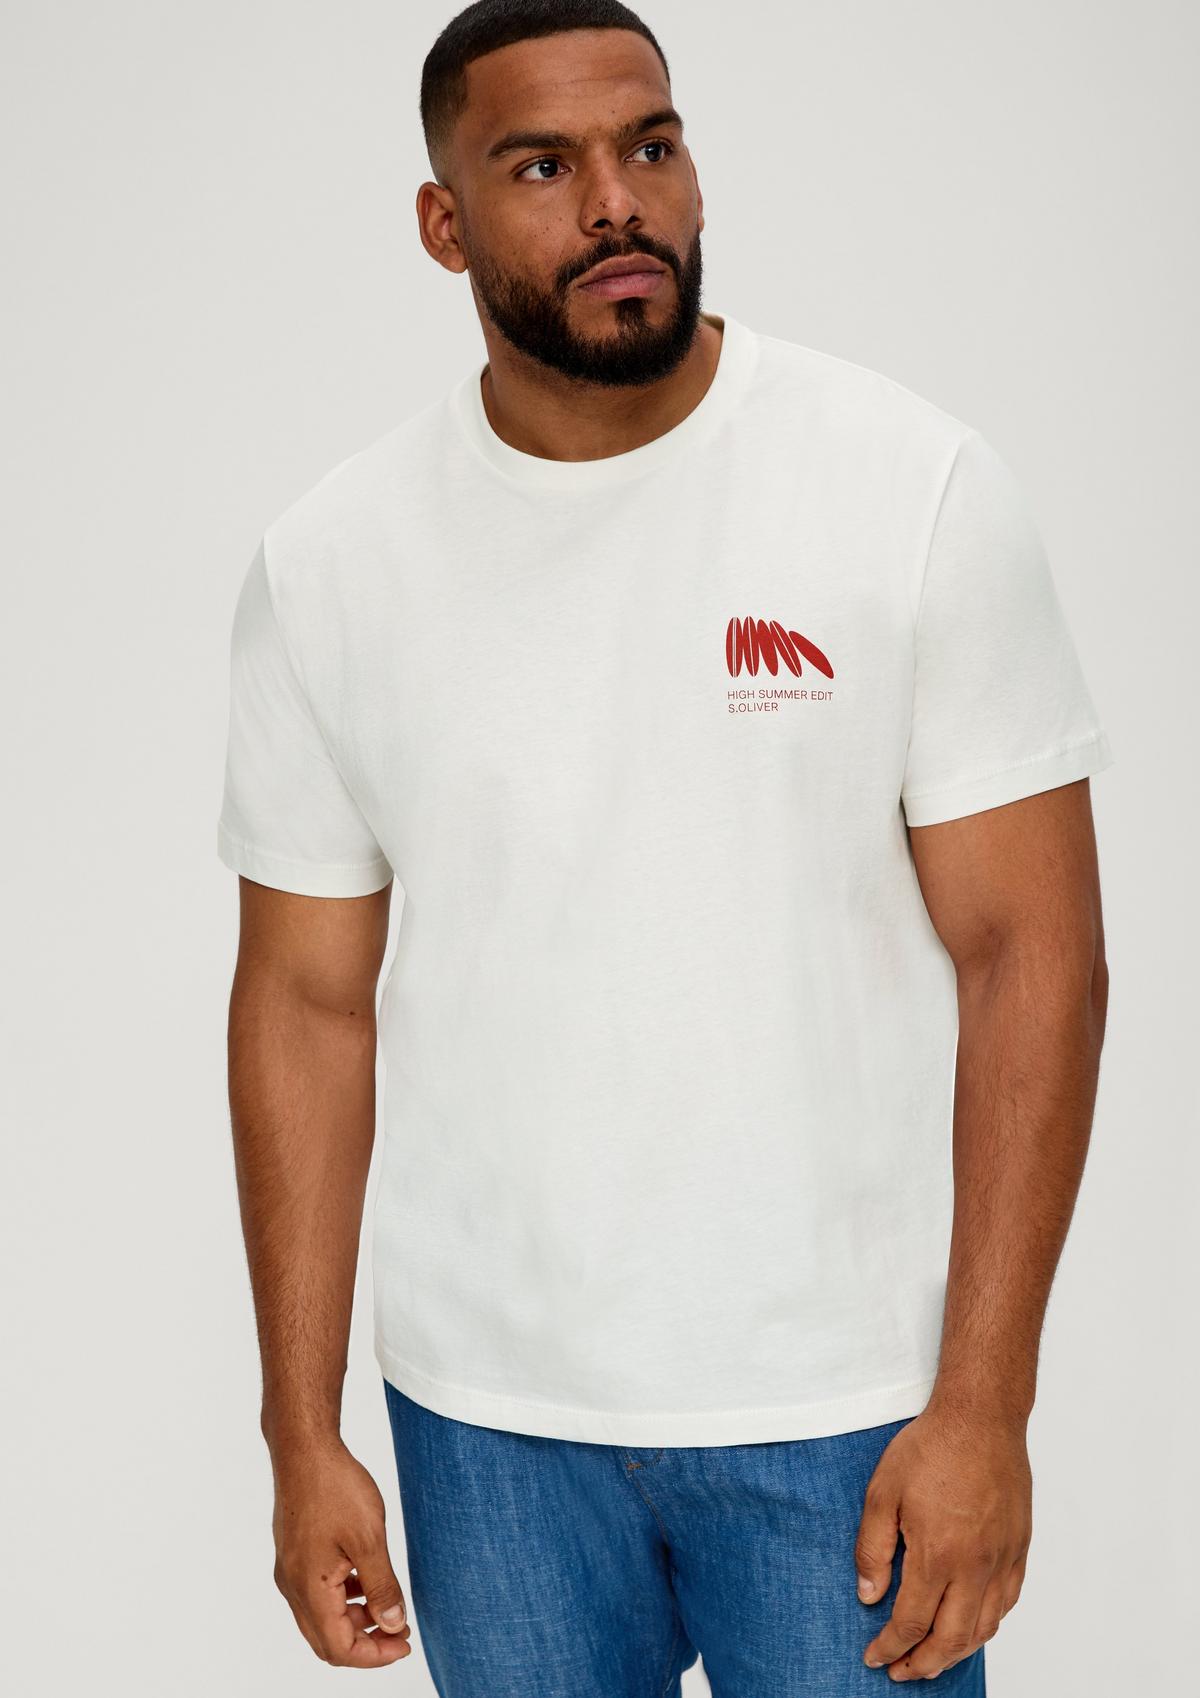 Cotton T-shirt with - white a print front